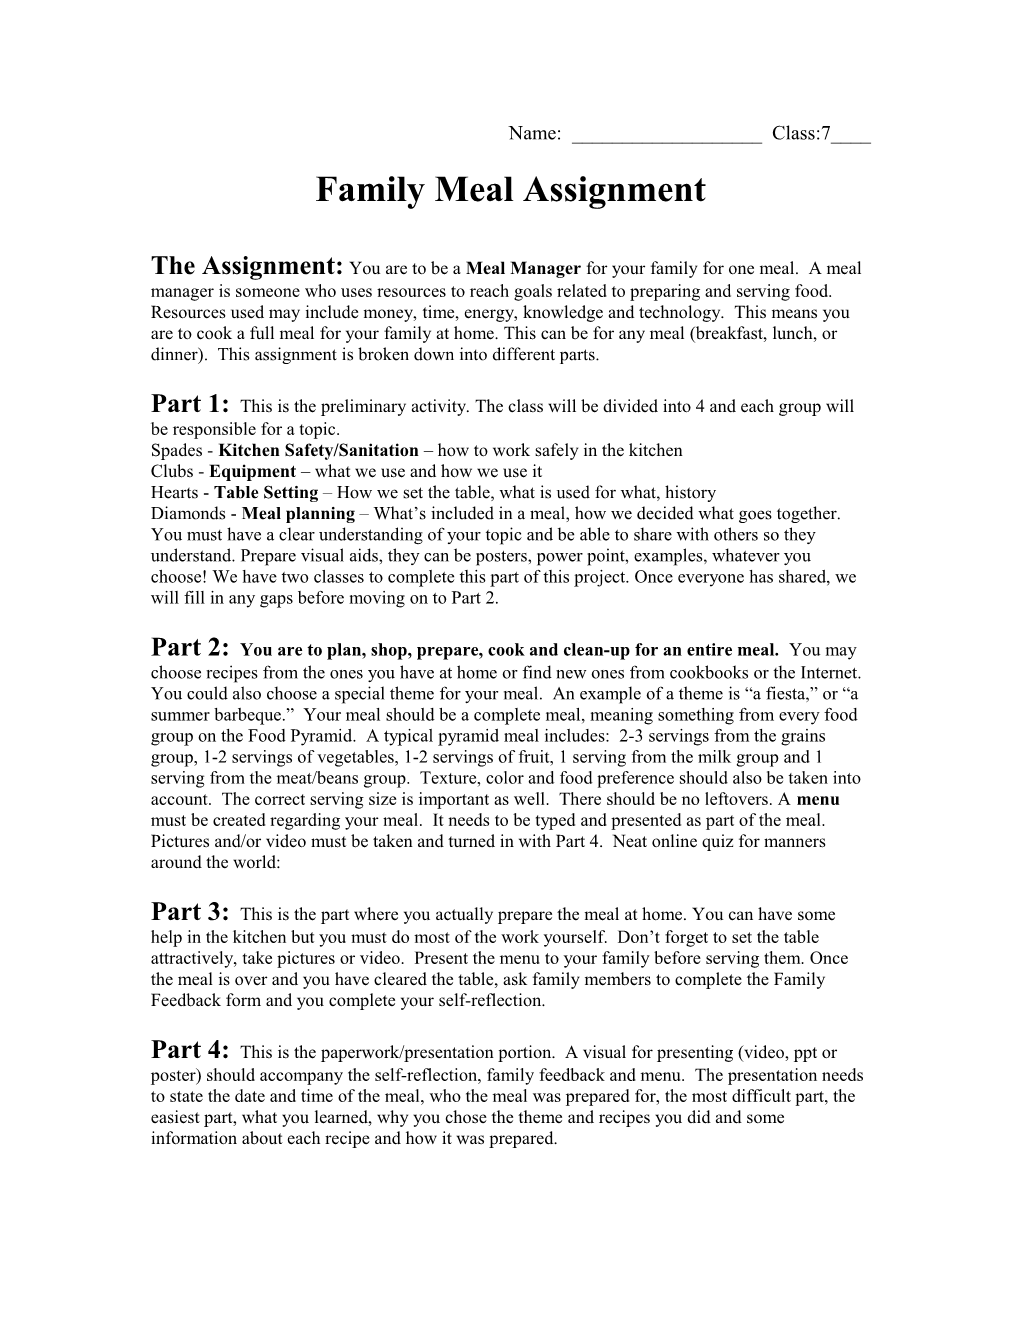 Family Meal Assignment